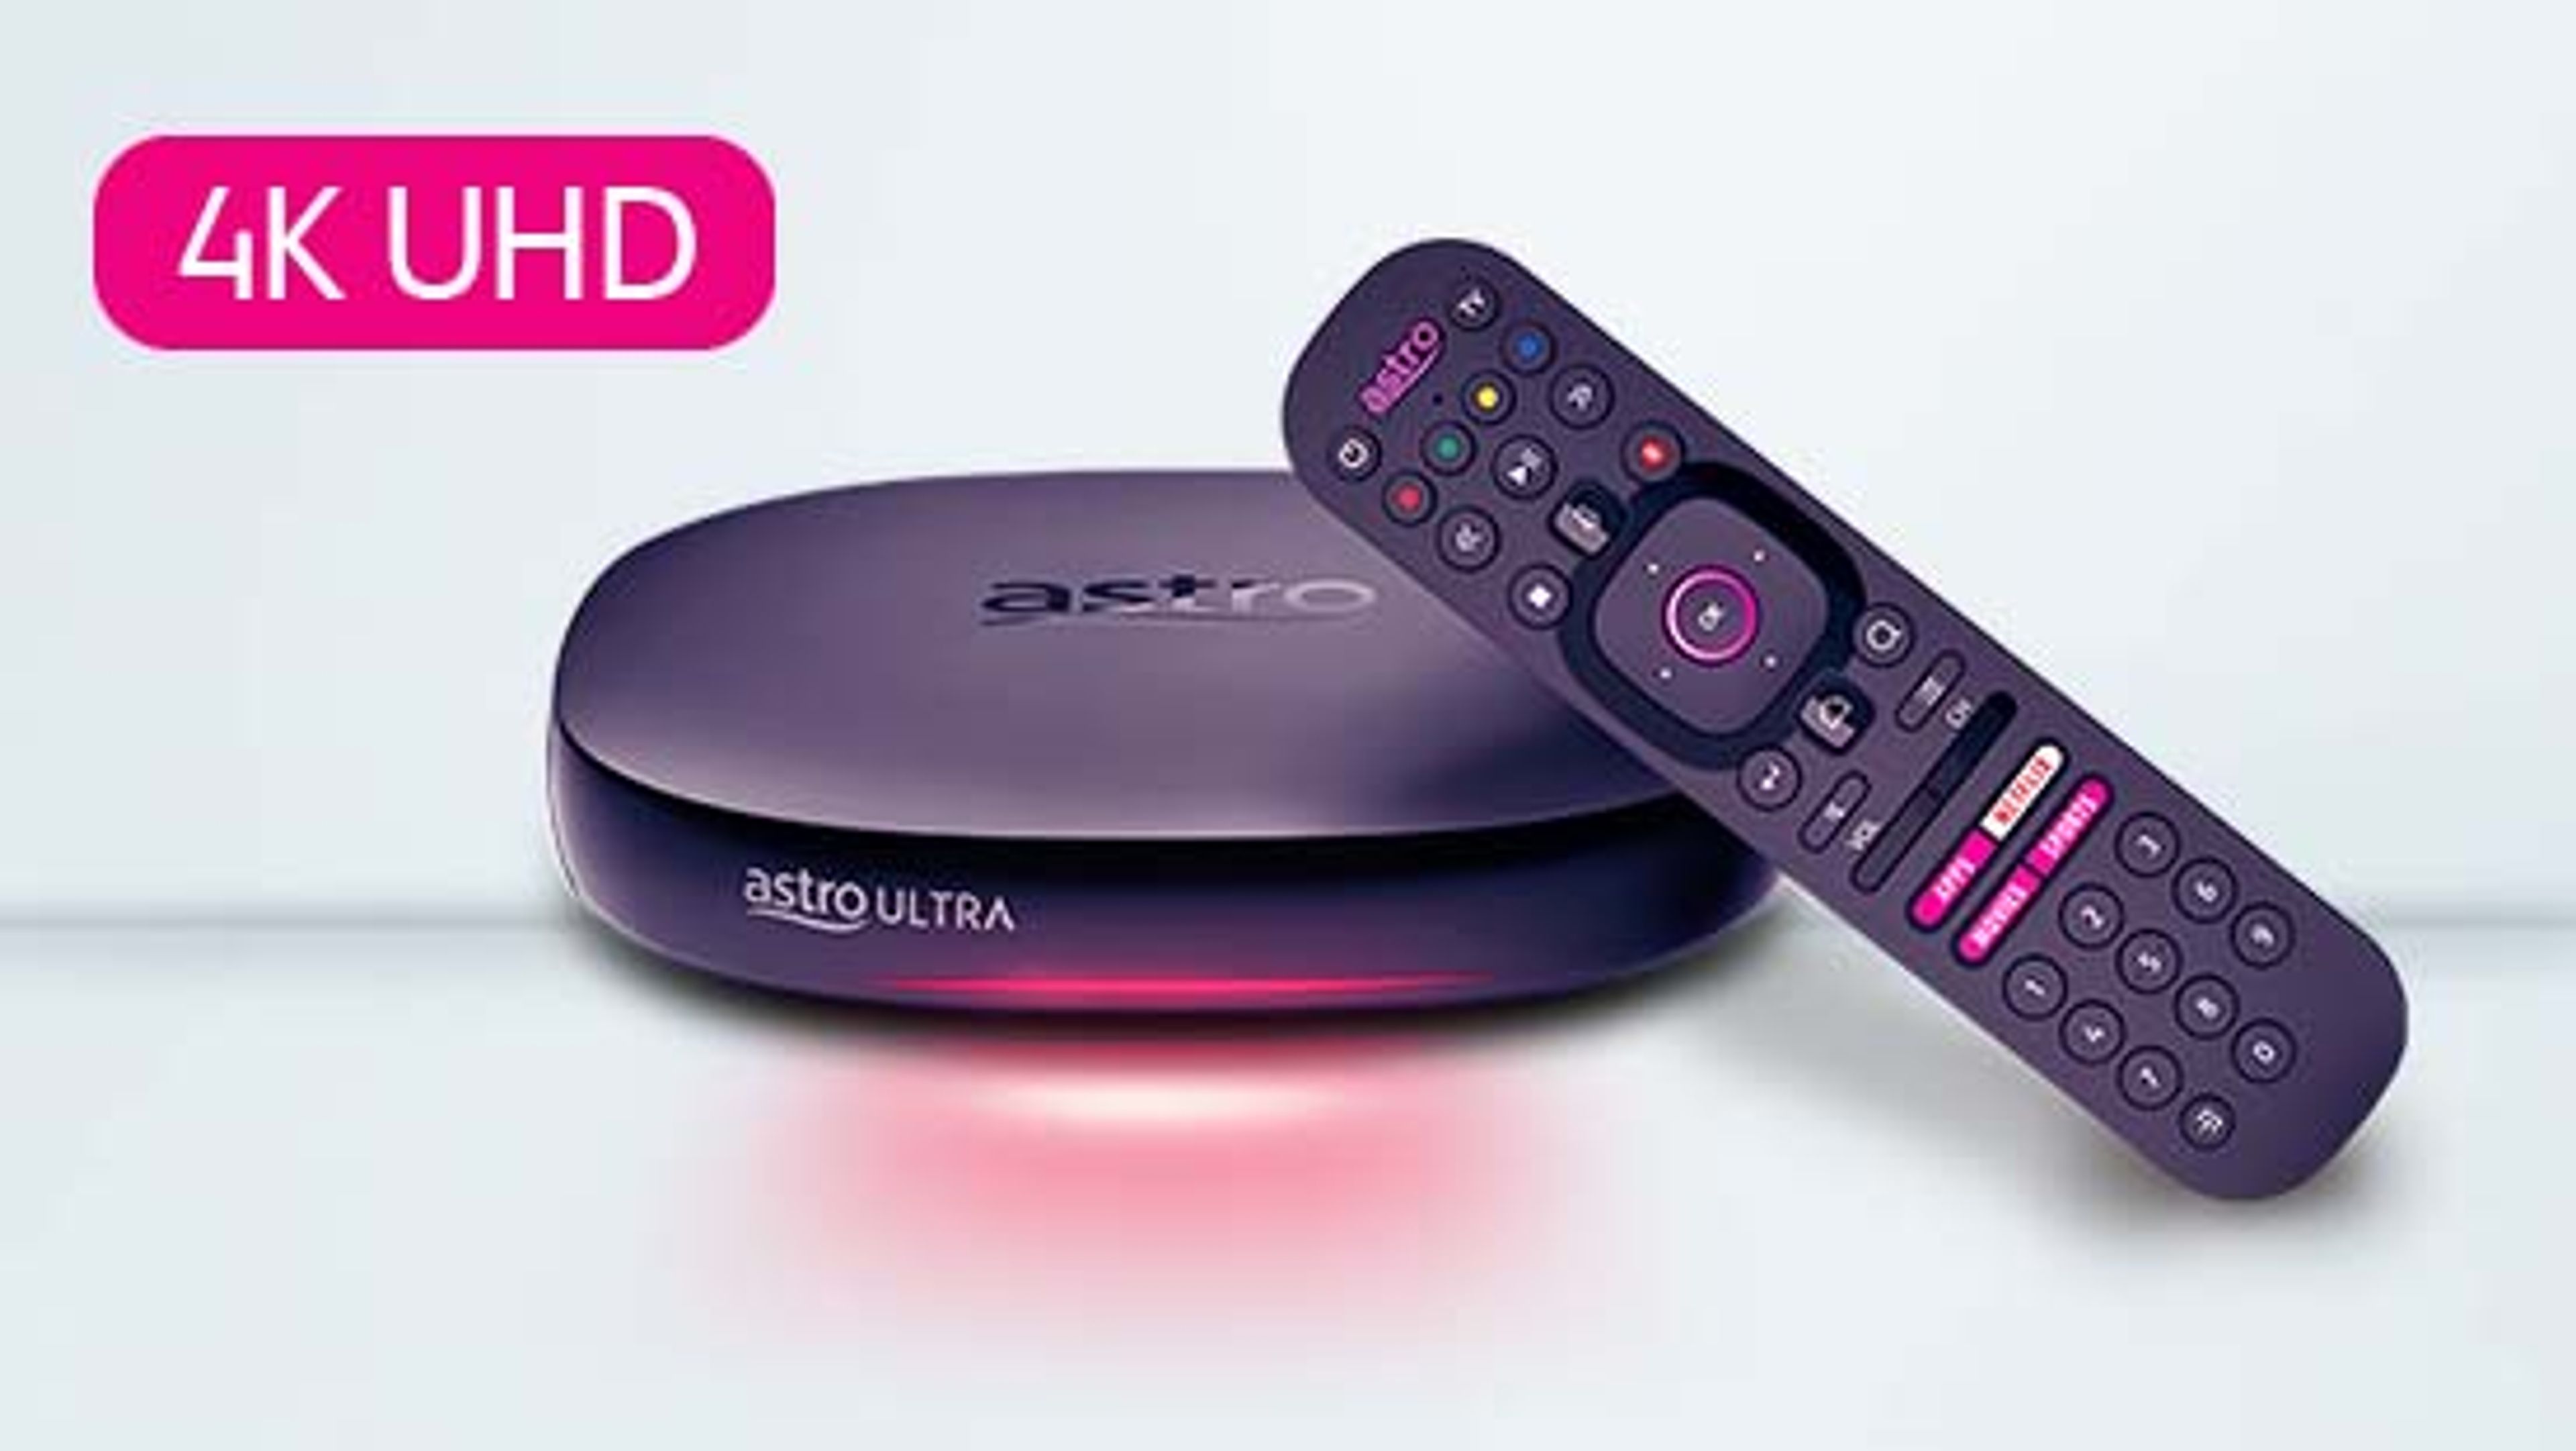 Enhance your viewing experience with Ultra Box in HD and 4K UHD